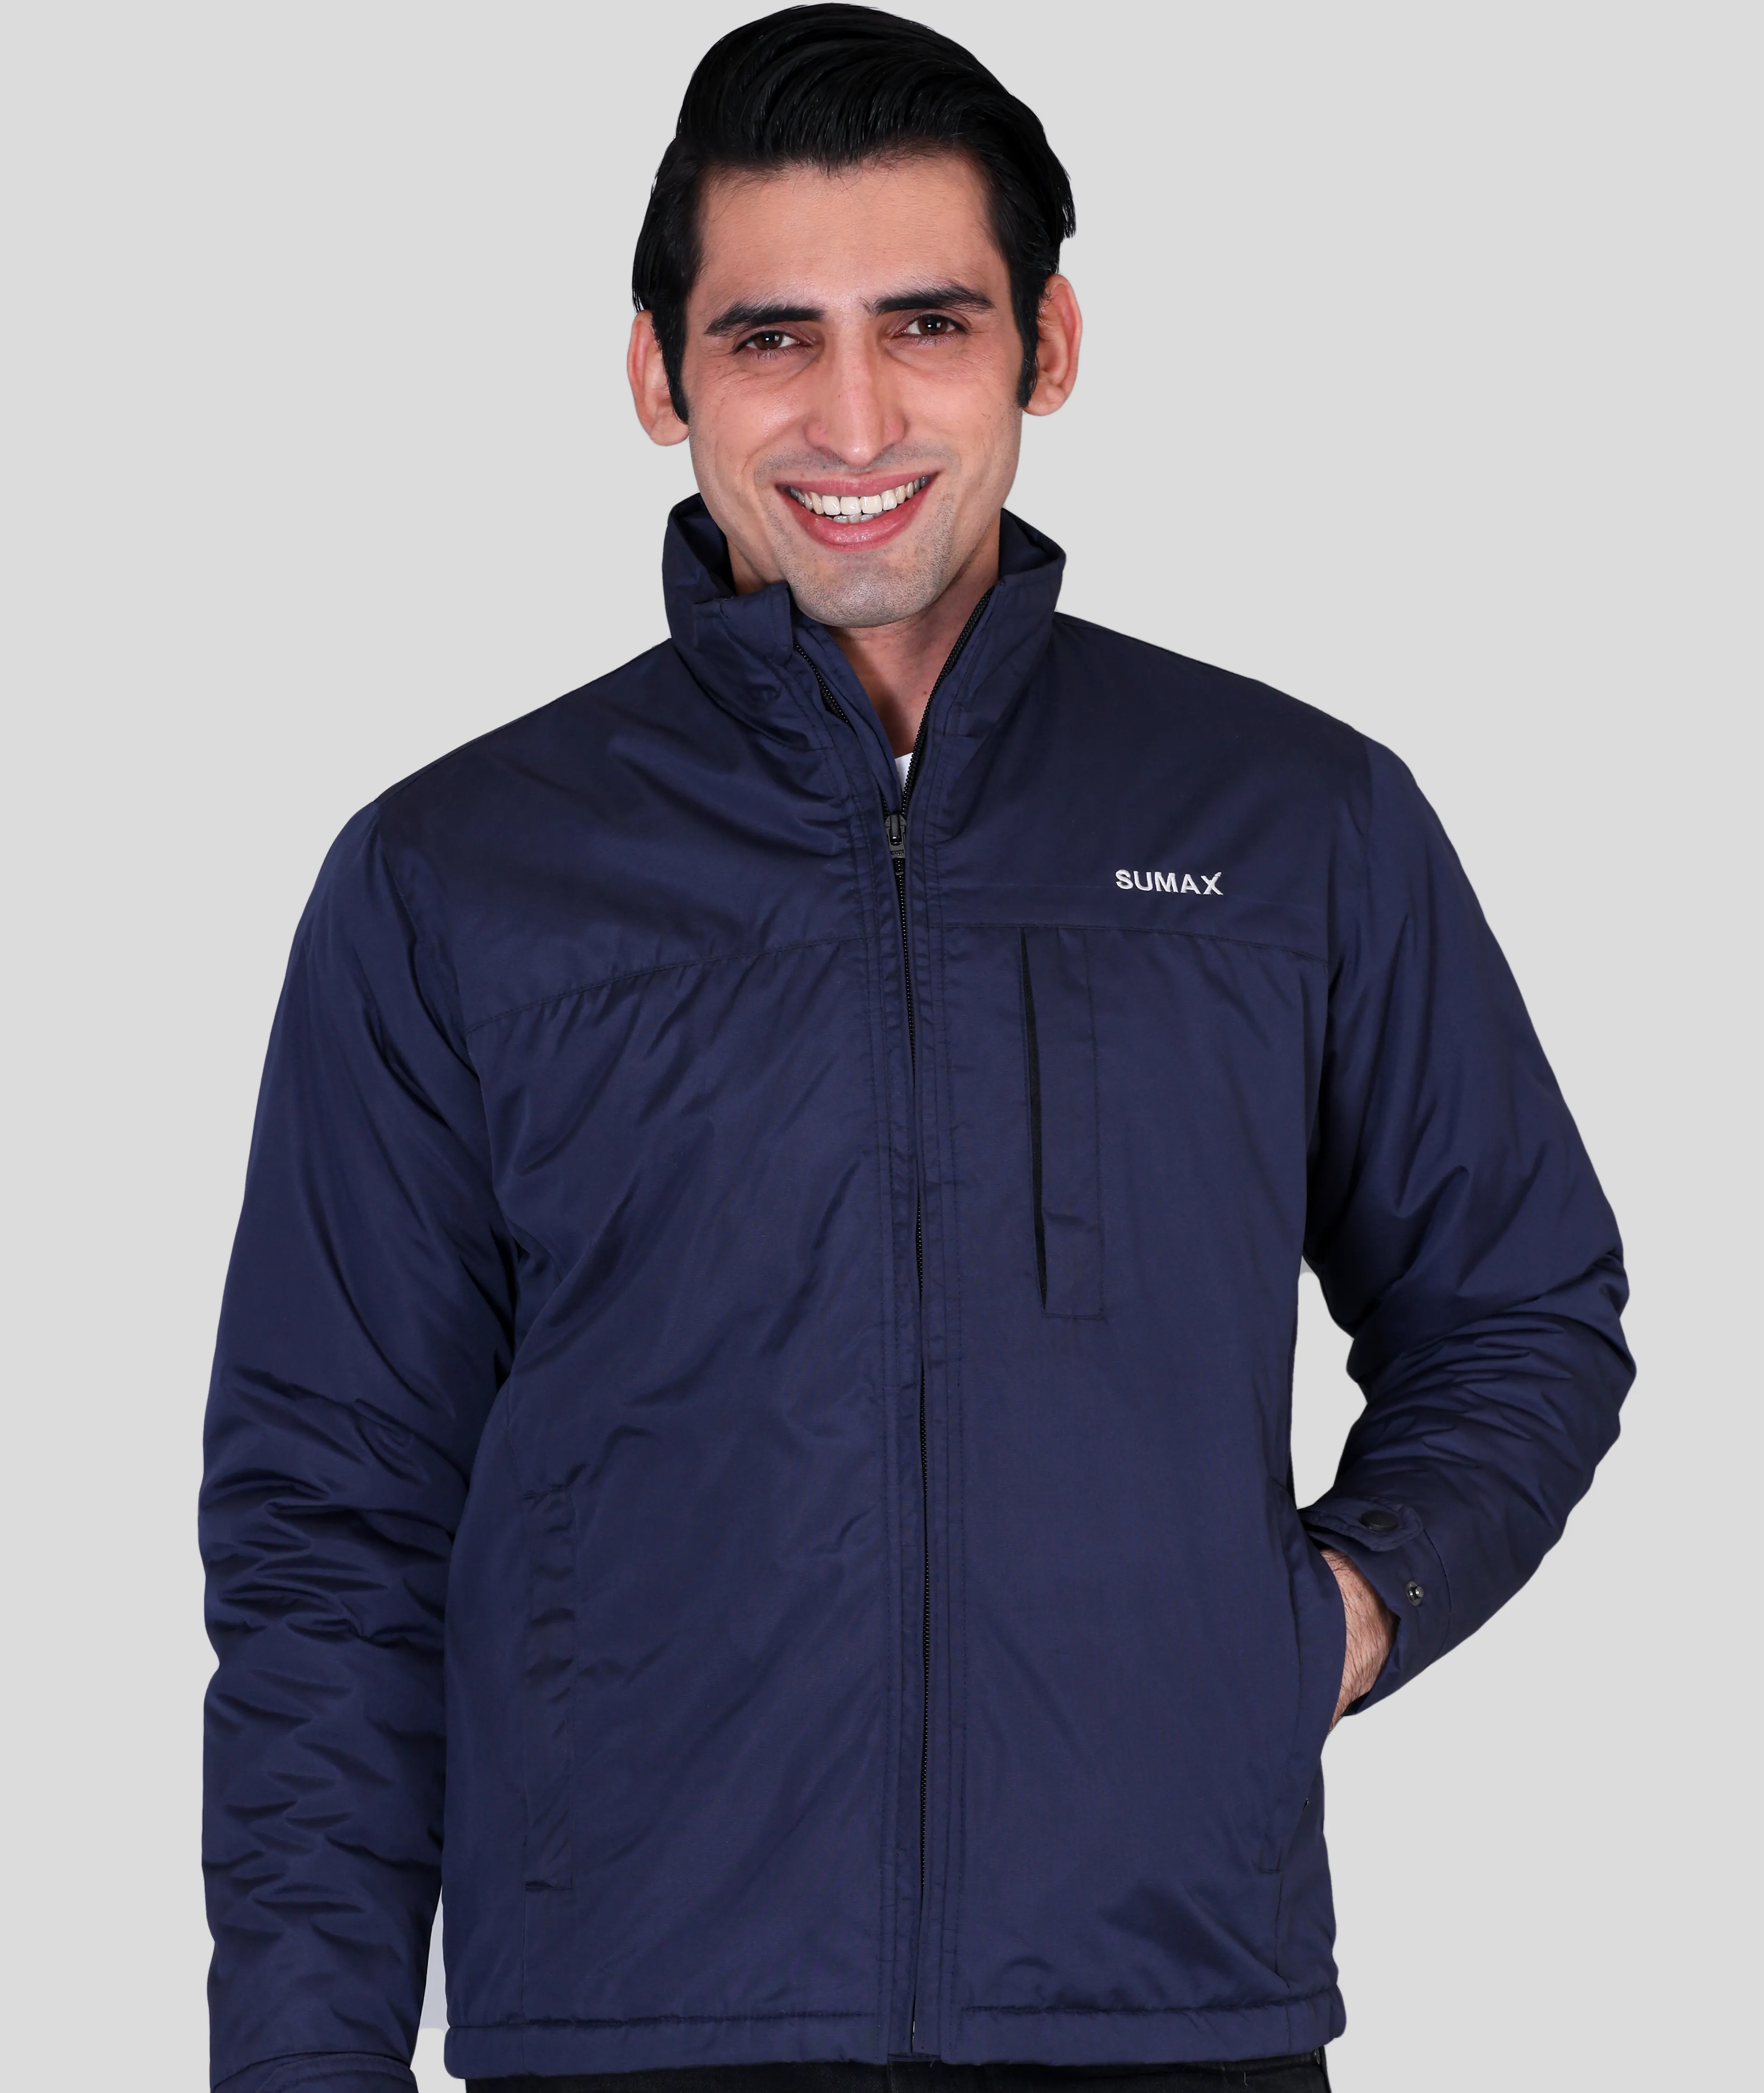 Manufacturer of customize jackets